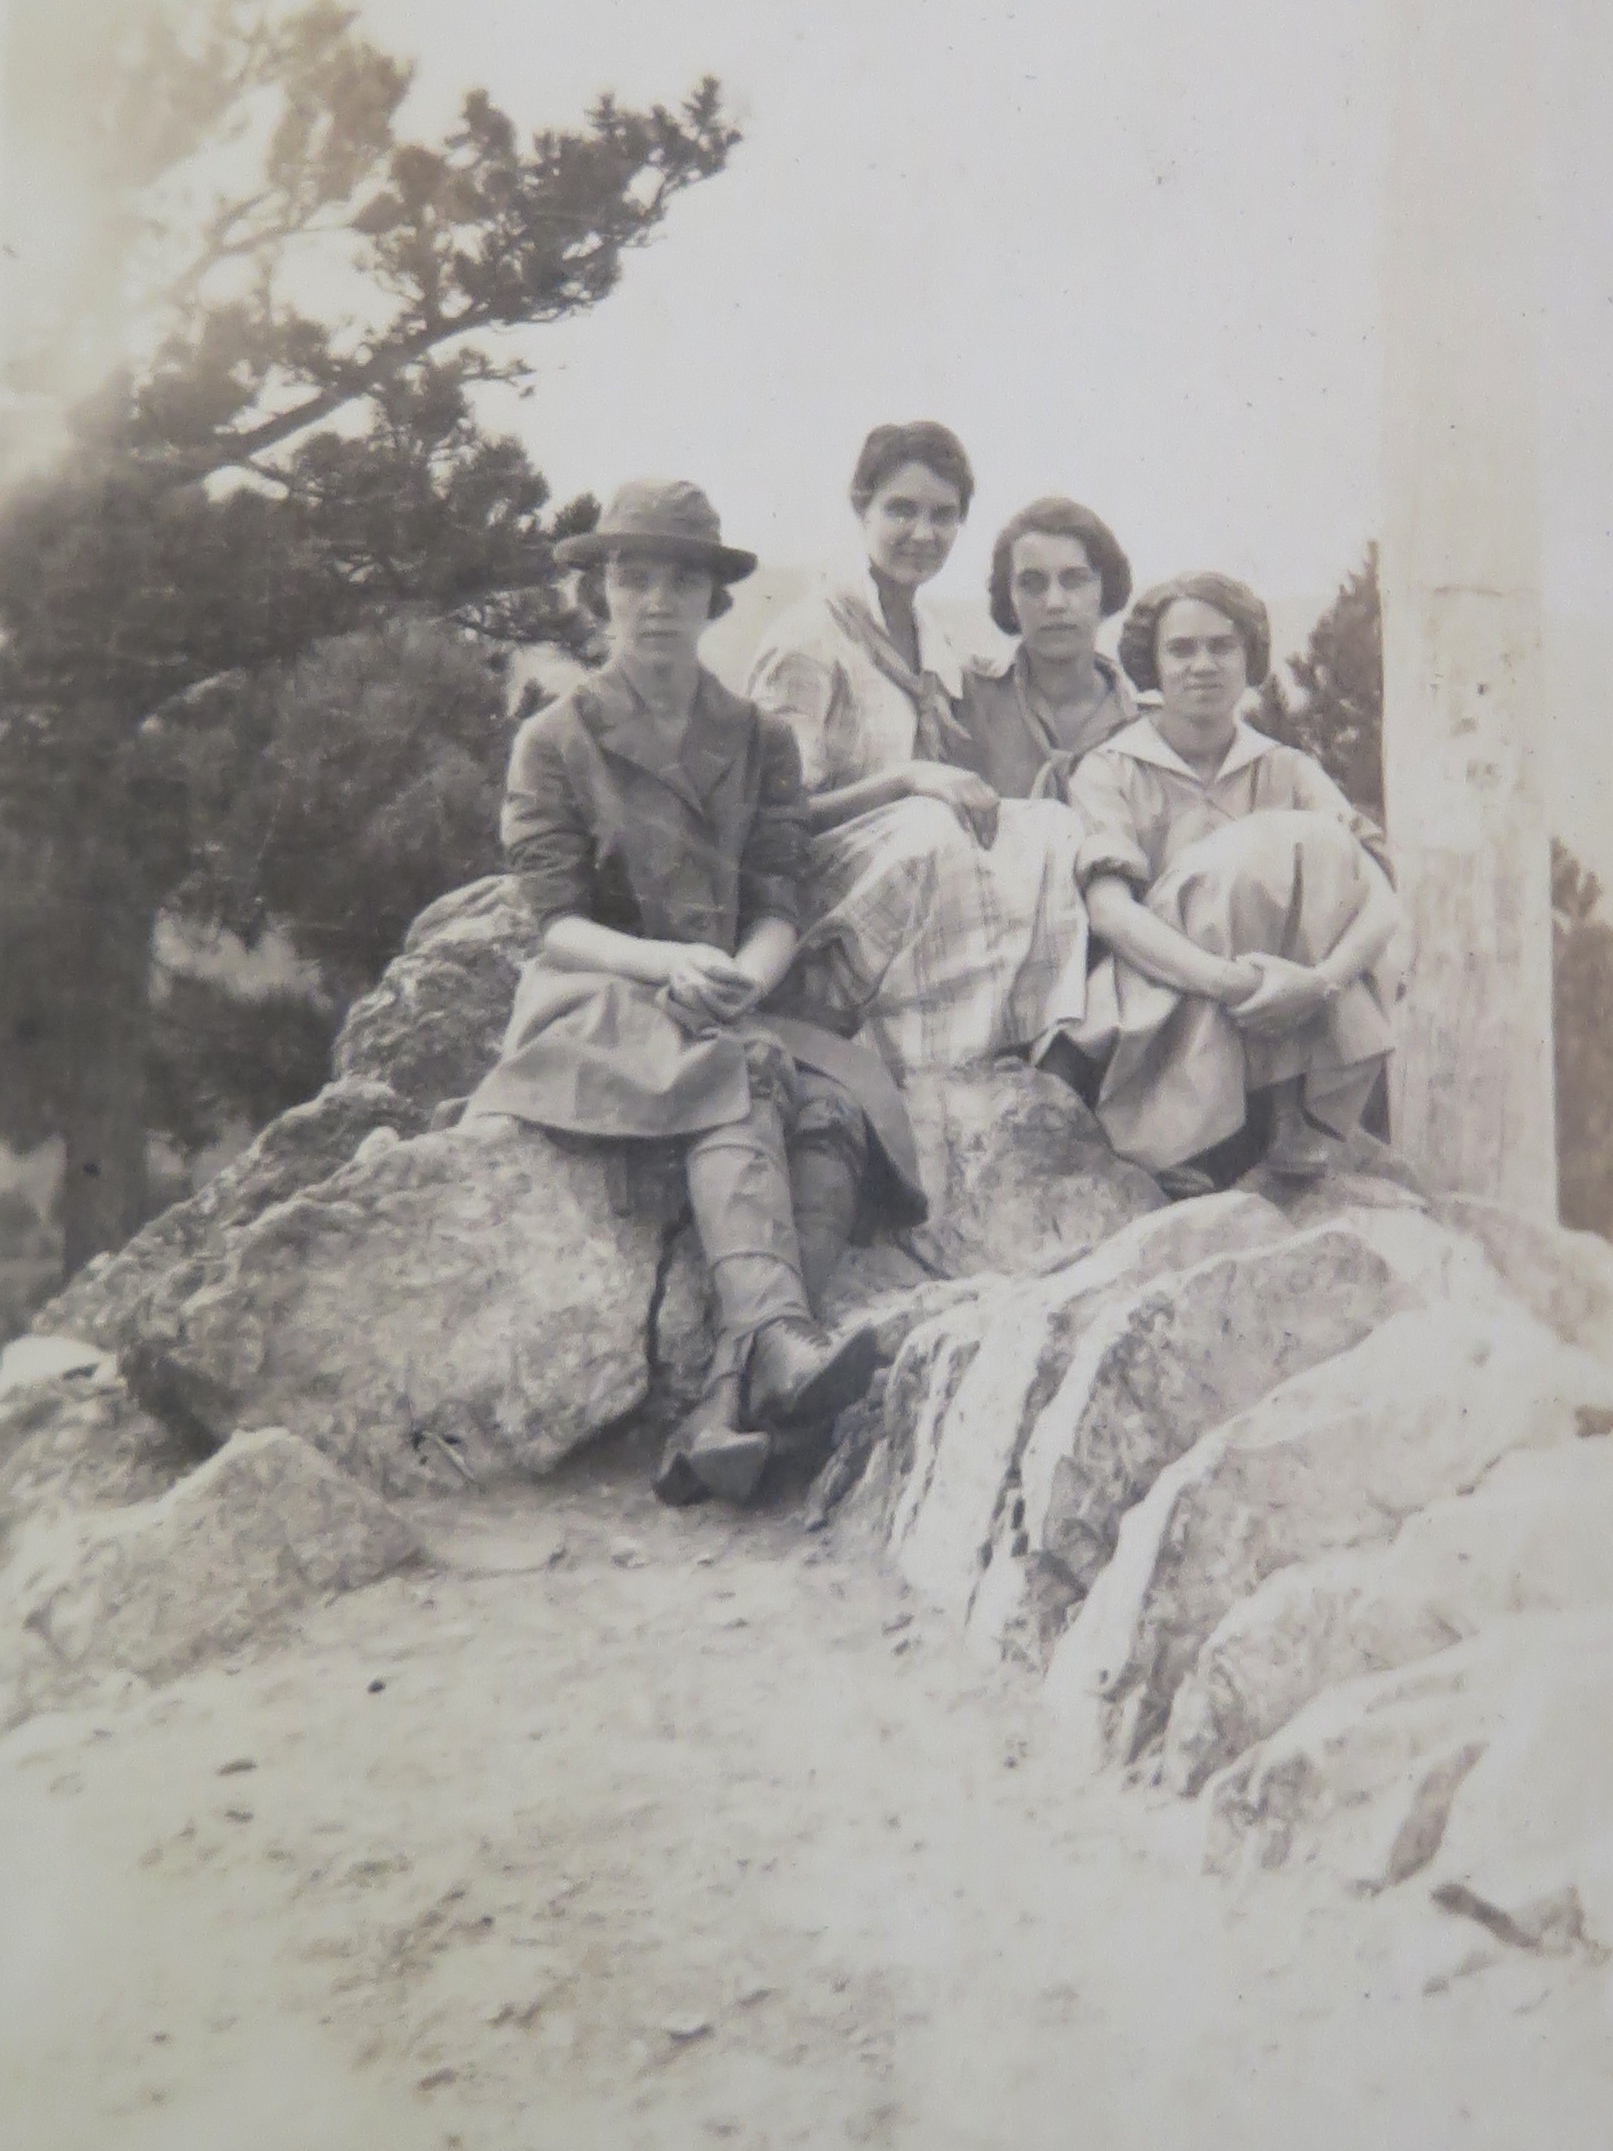 Photo of four women posing for a photo. The are sitting on some large boulders, and hold their skirts close to their knees as they sit. One woman, on the left, sits with her legs outstretched and her ankles crossed. She is wearing a skirt and tall boots, with a jacket and hat. The other 3 women don't have hats but wear skirts and have kerchiefs tied around their necks. All of the women either have short hair or have pulled their hair up on their heads.